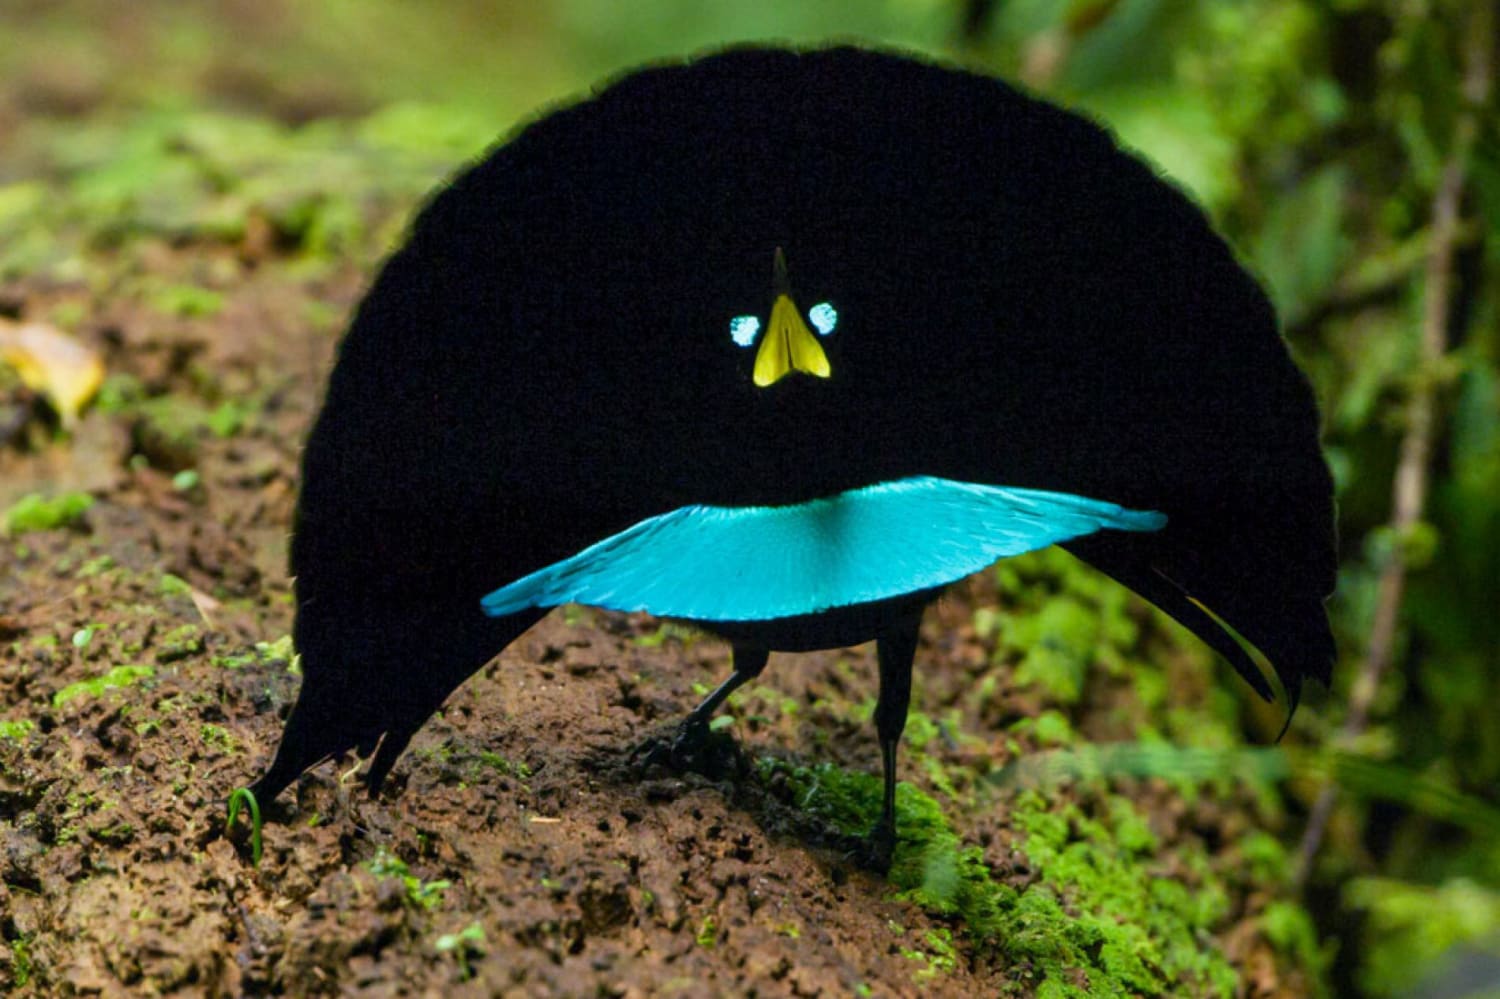 New Bird of Paradise Species Has Smooth Dance Moves